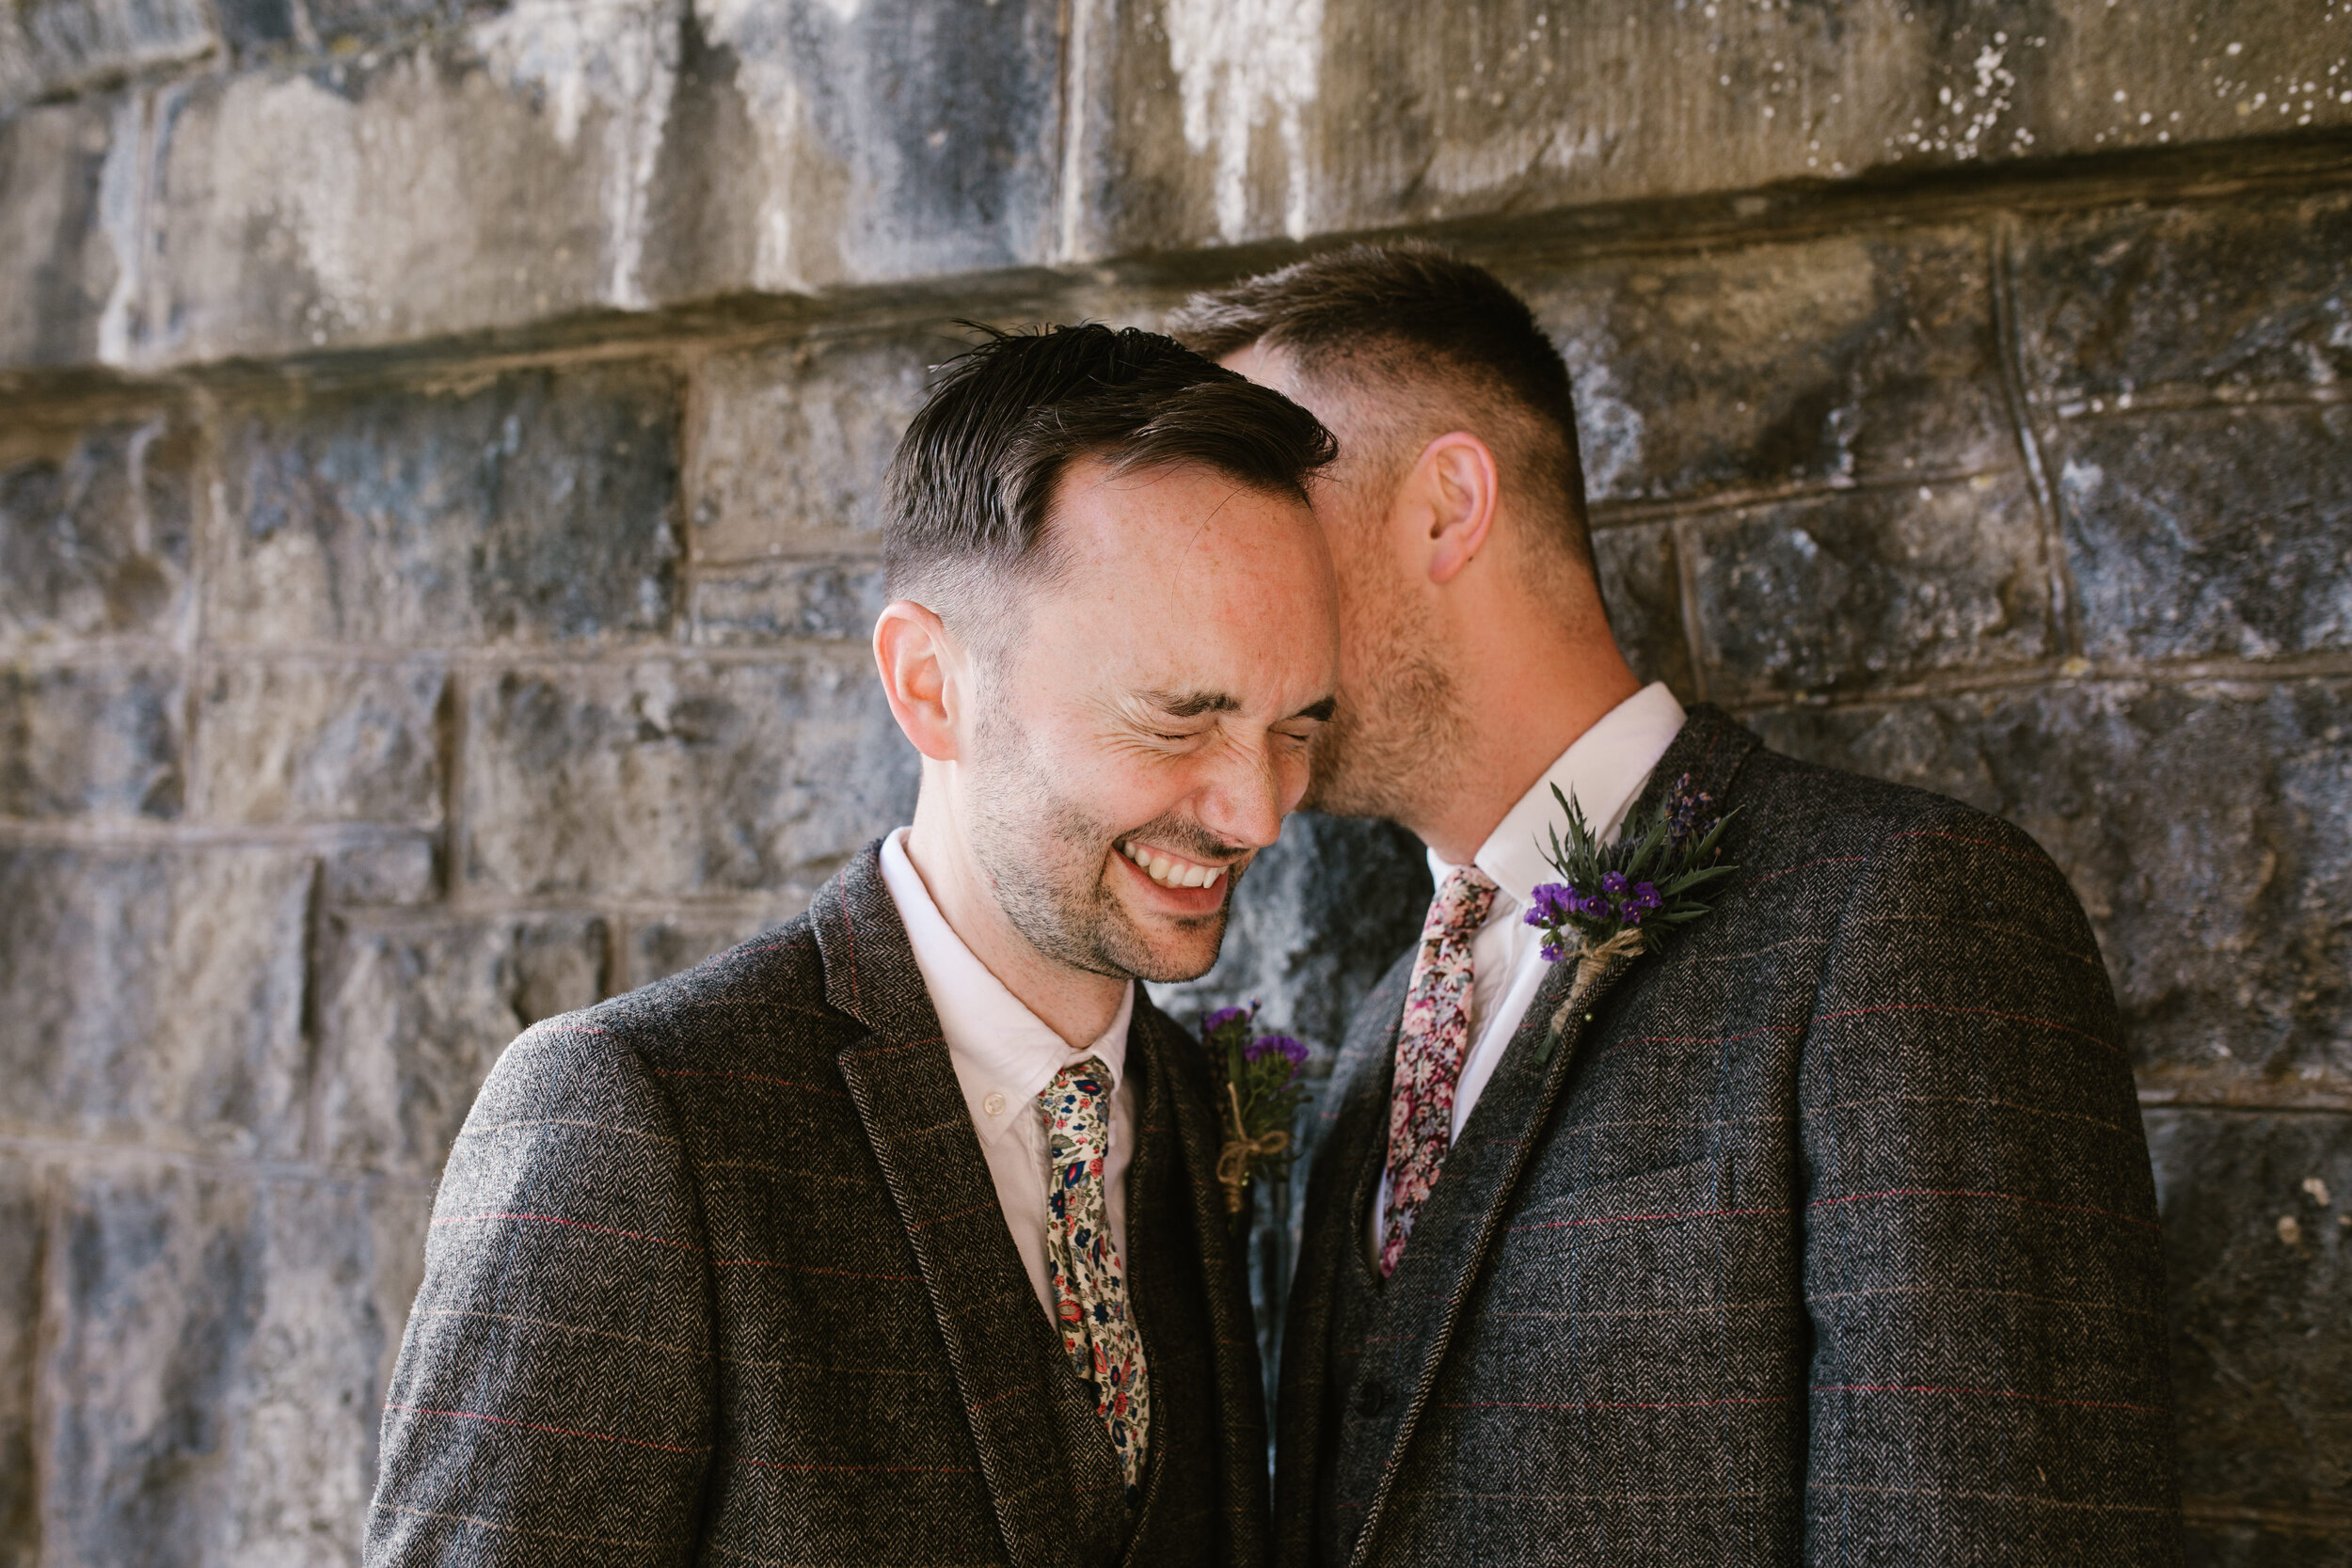 groom whispering into his grooms ear, a fun happy photo